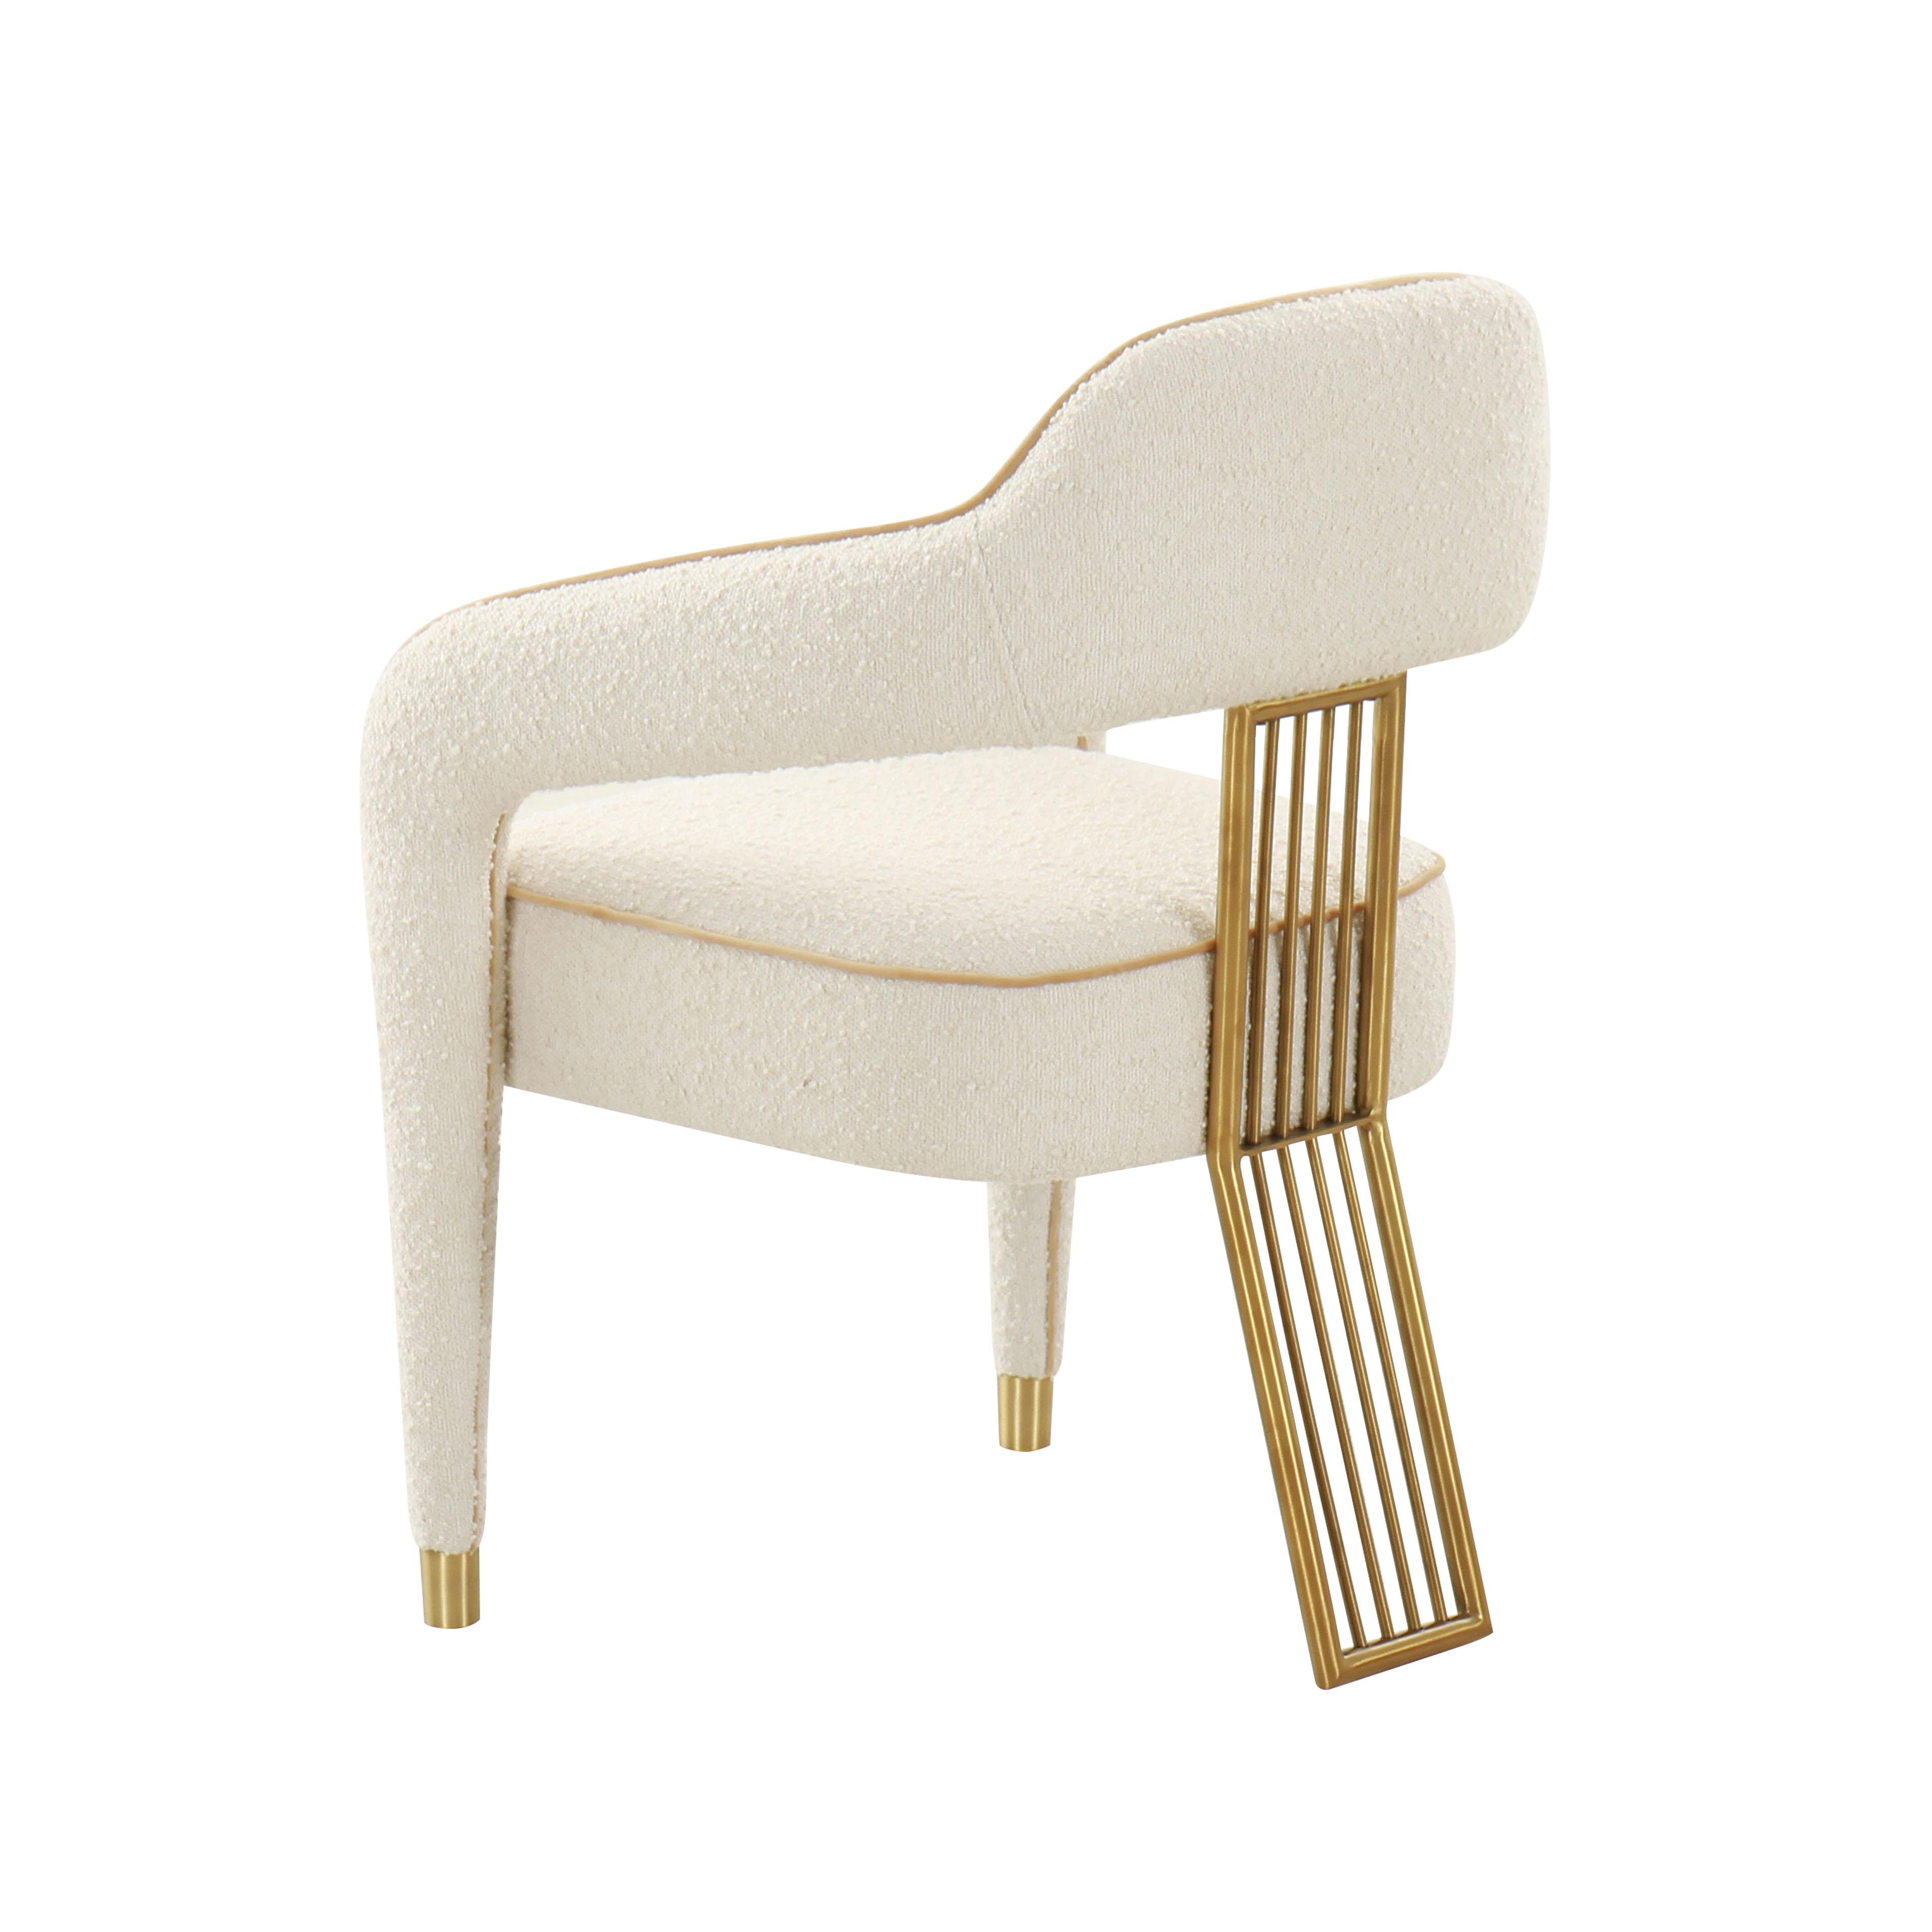 Corralis Cream Boucle Dining Chair - Image 2